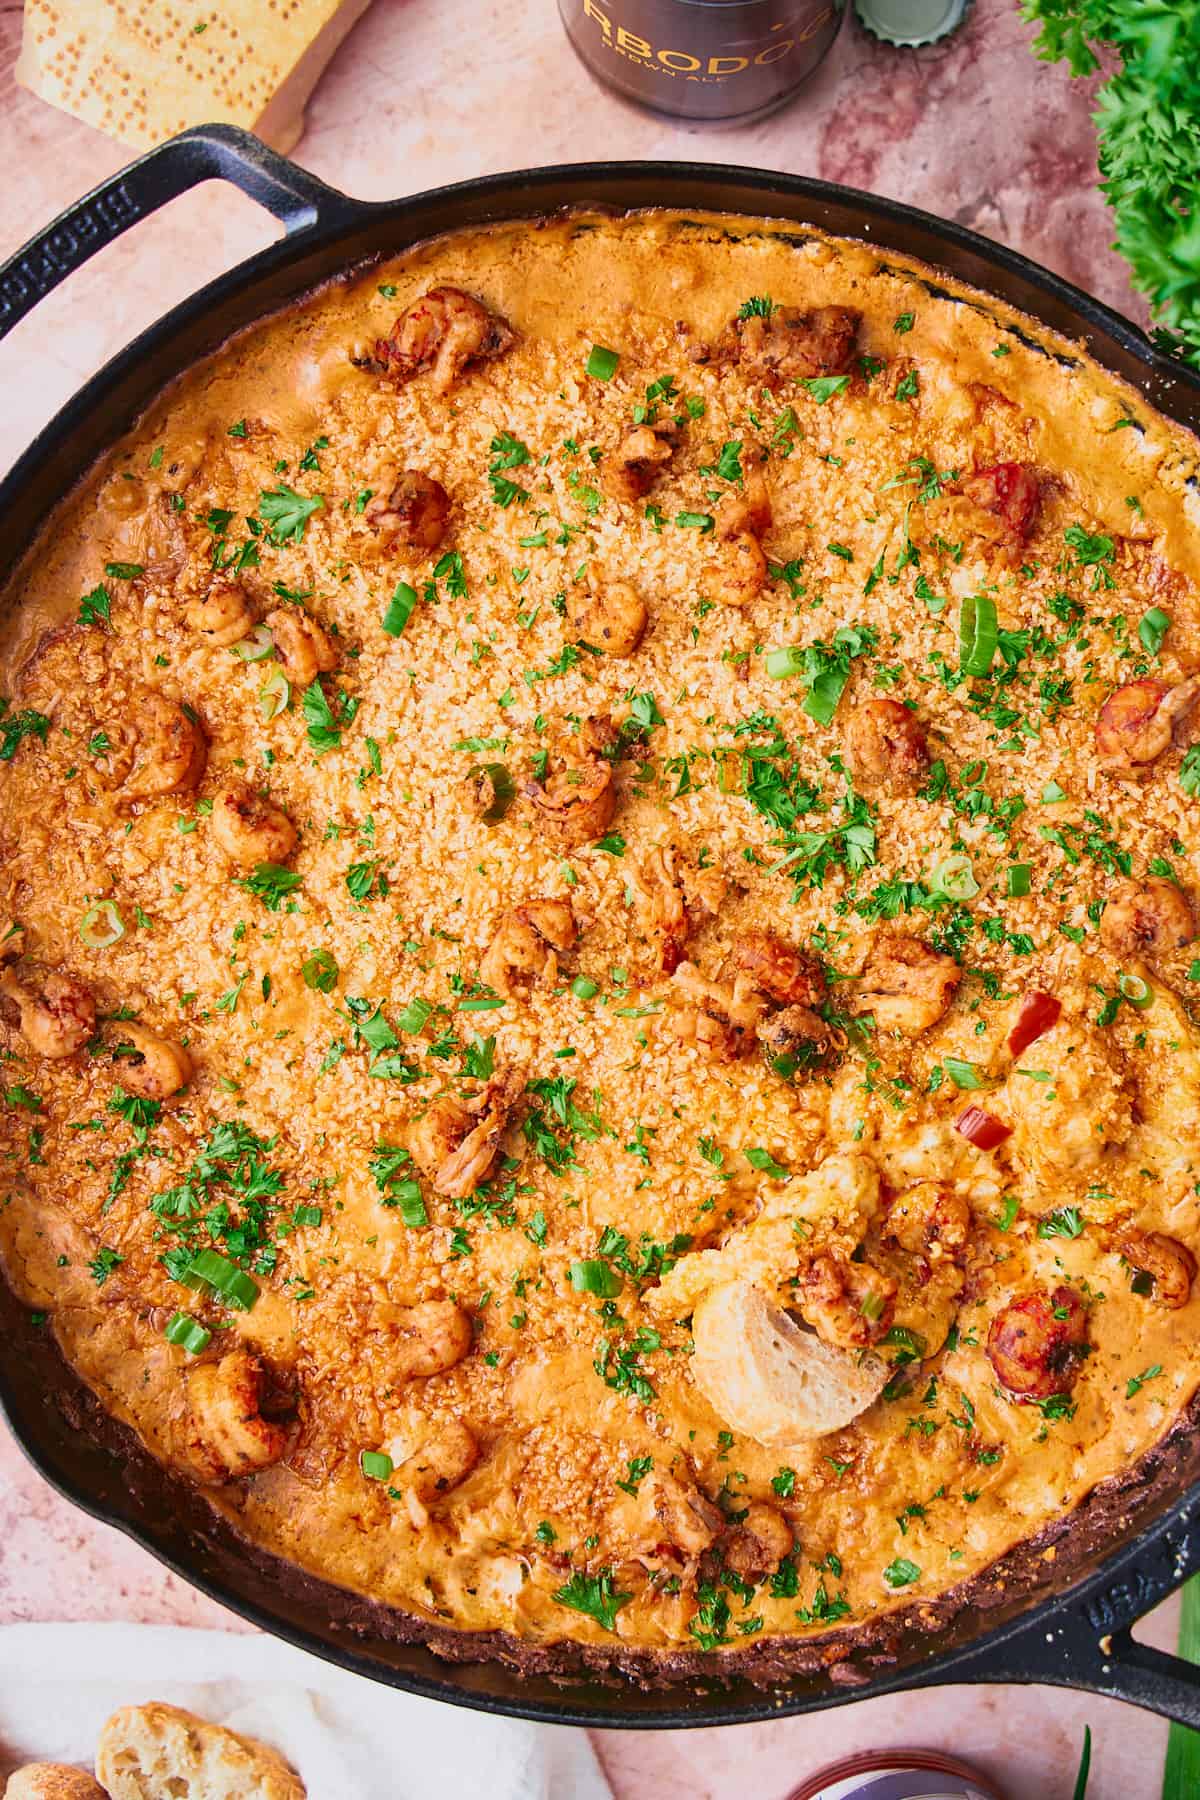 Cheesy and gooey crawfish dip topped with pieces of crawfish with a piece of bread in the center. 